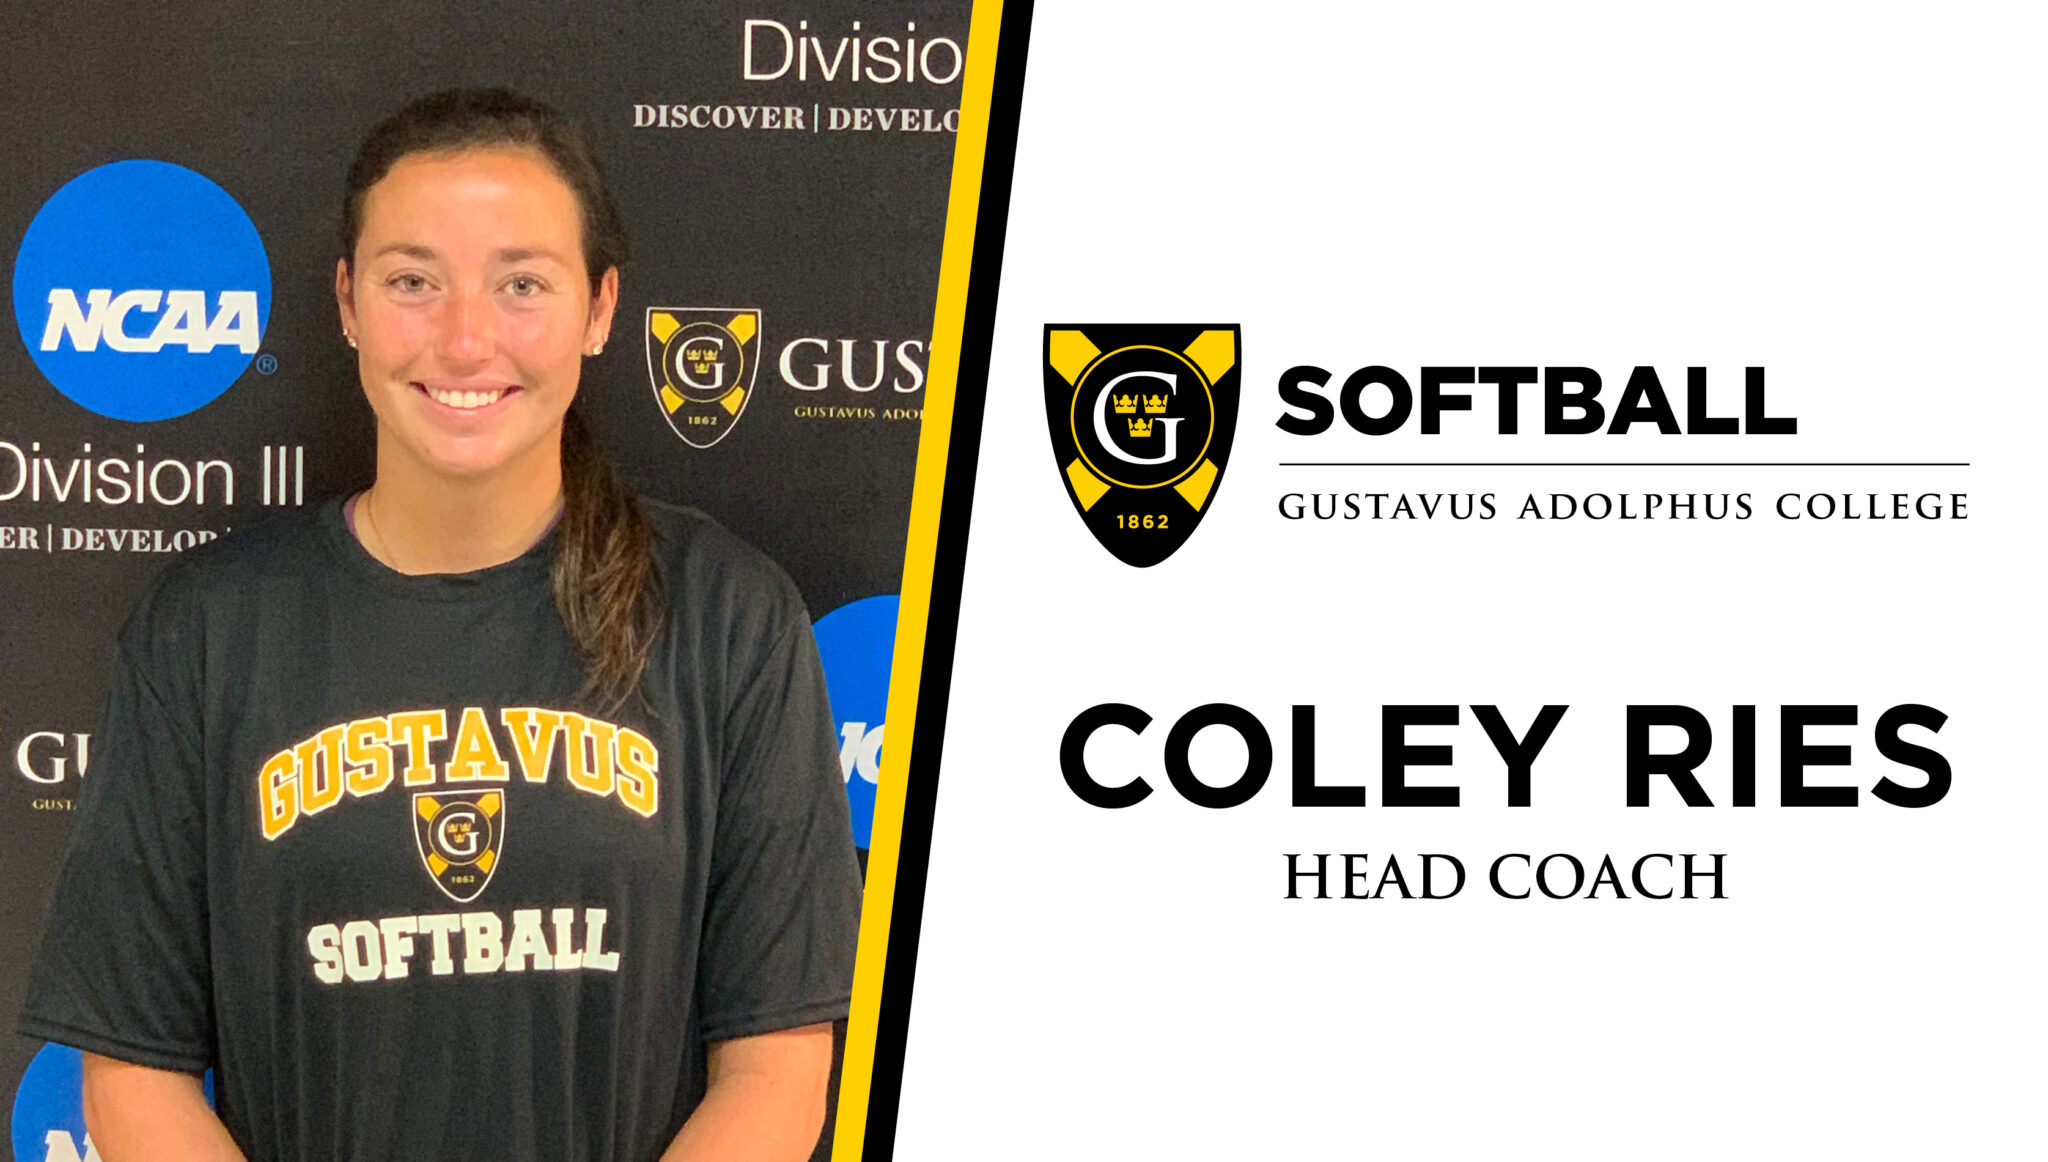 Coley Ries Named Gustavus Head Softball Coach - Posted on August 10th